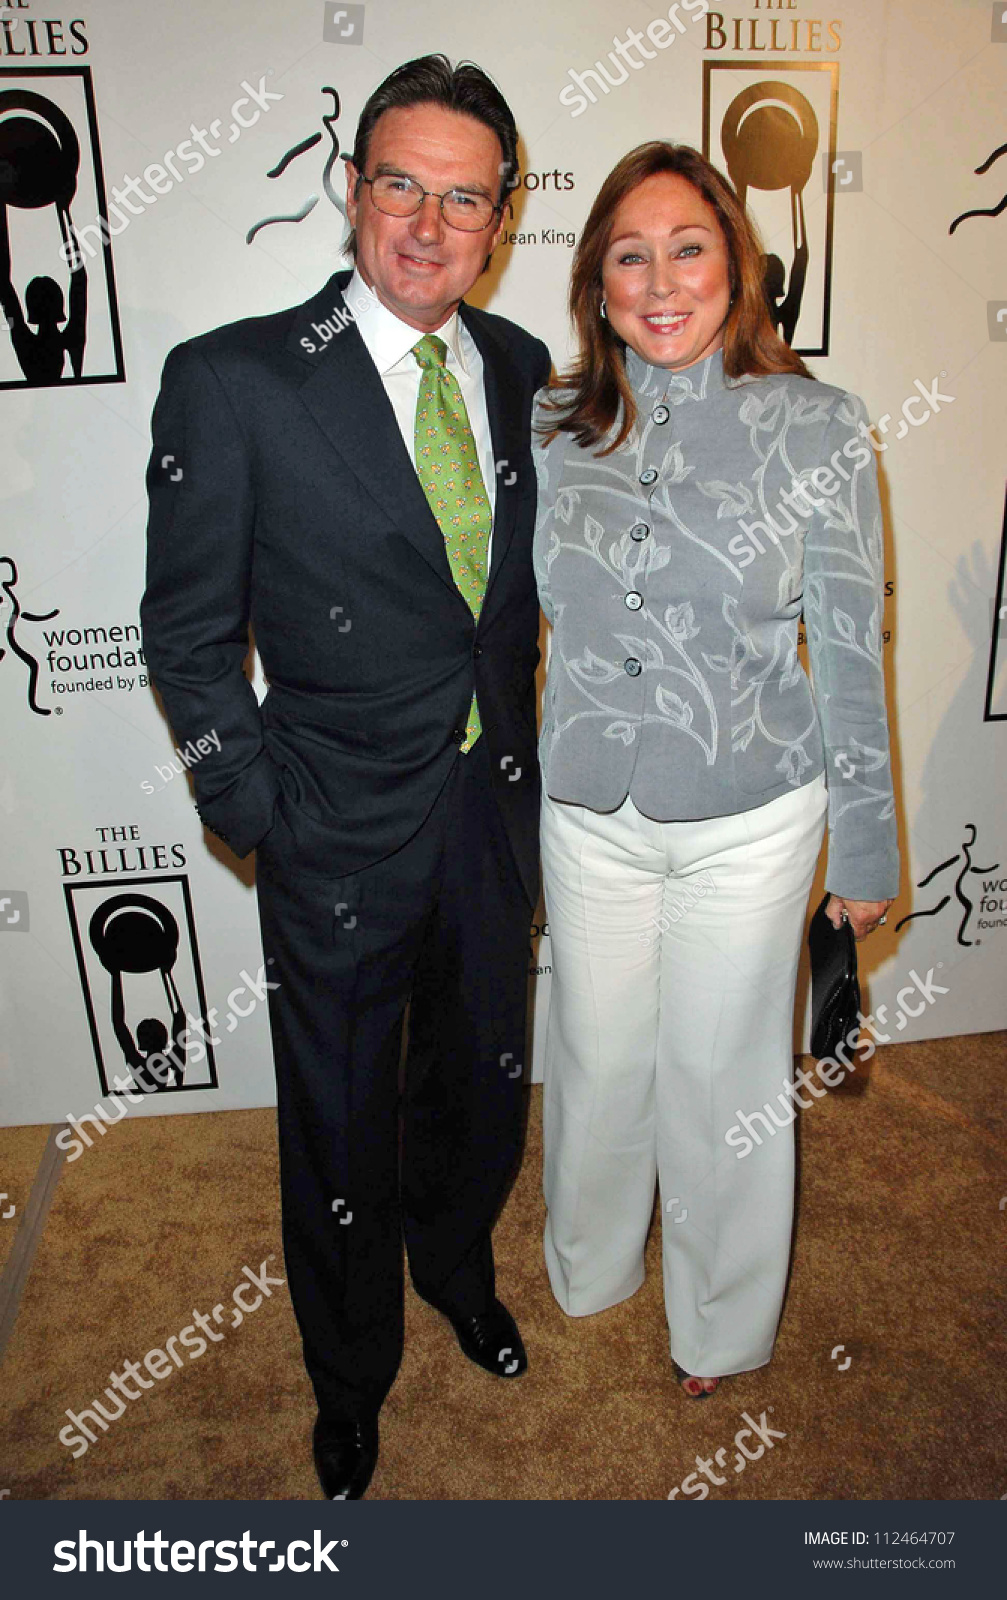 Jimmy connors and patti mcguire